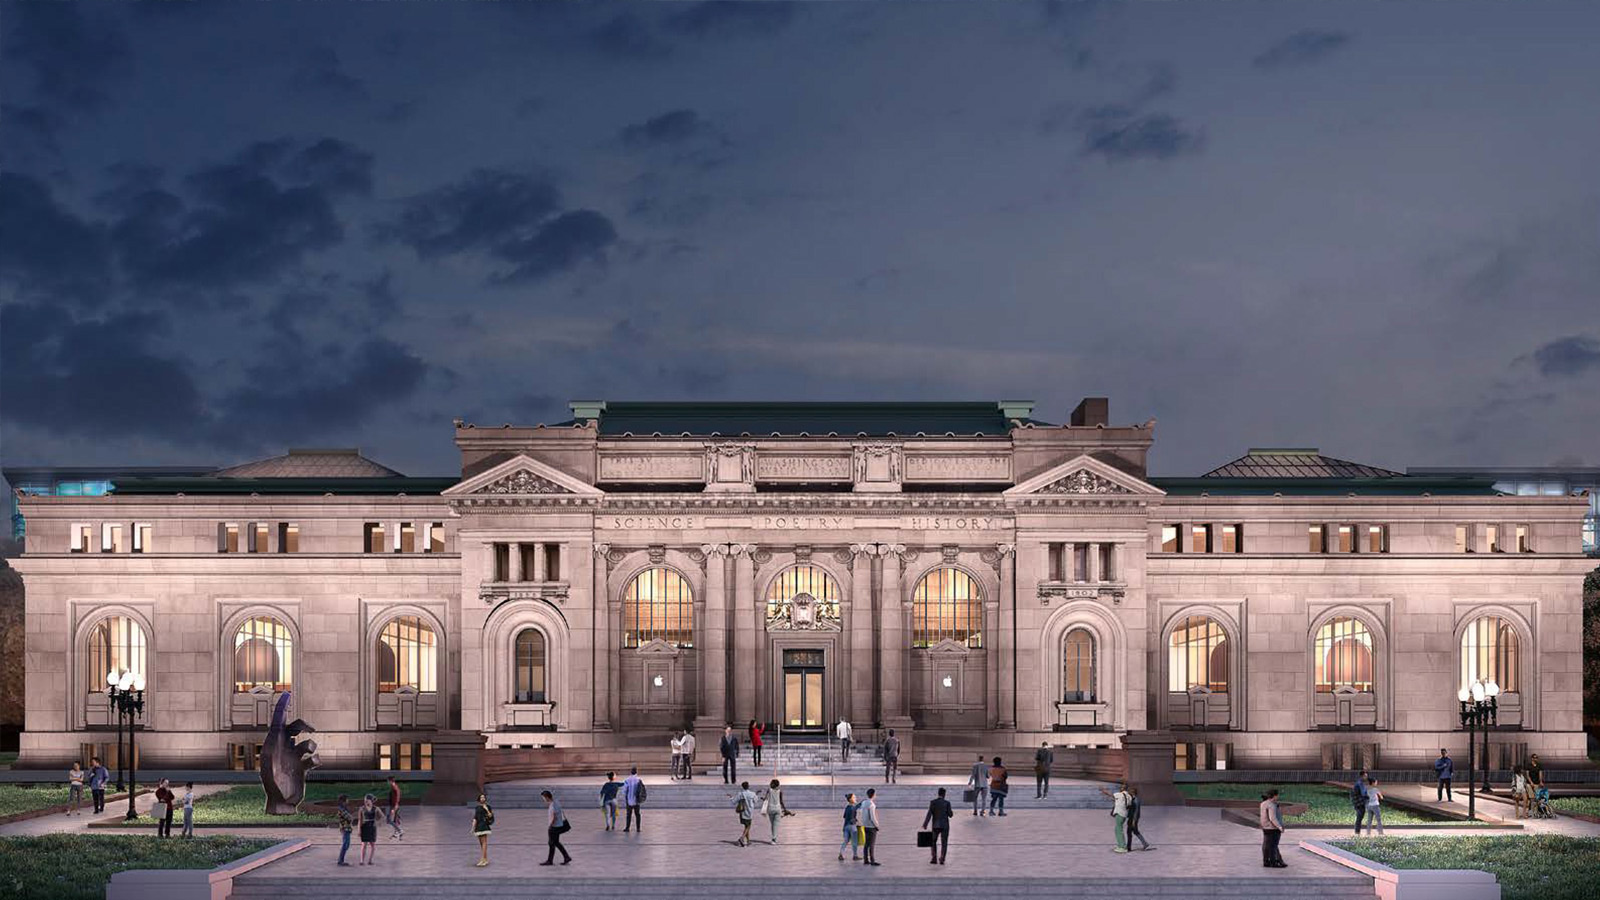 Confirmed: Apple will build its (potentially) most glorious store at the Carnegie Library in Washington, D.C.